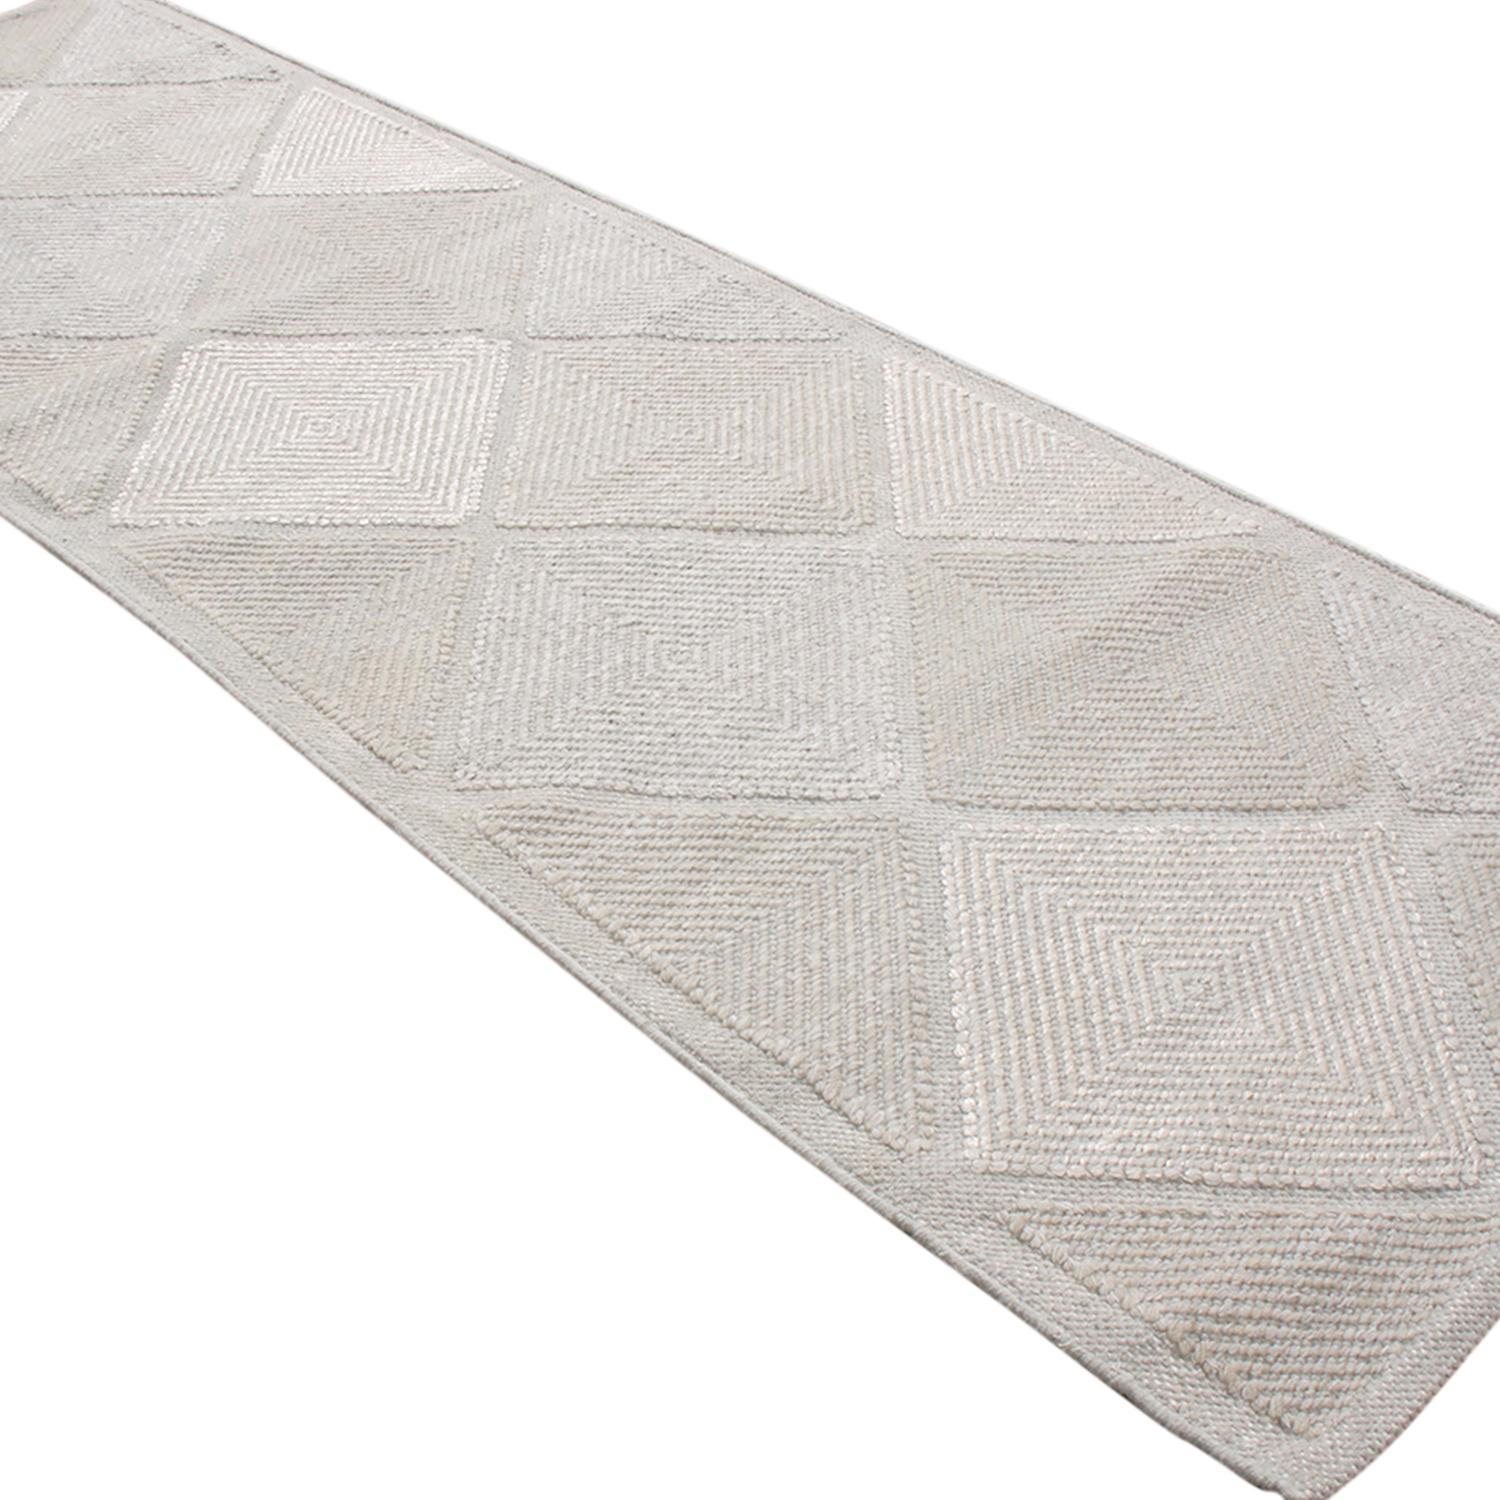 Originating from India, this natural polyester rug hails from Rug & Kilim’s outdoor Scandinavian collection, featuring designs including this rippling interpretation of celebrated Moroccan diamond patterns in multi-tonal cream white and gray